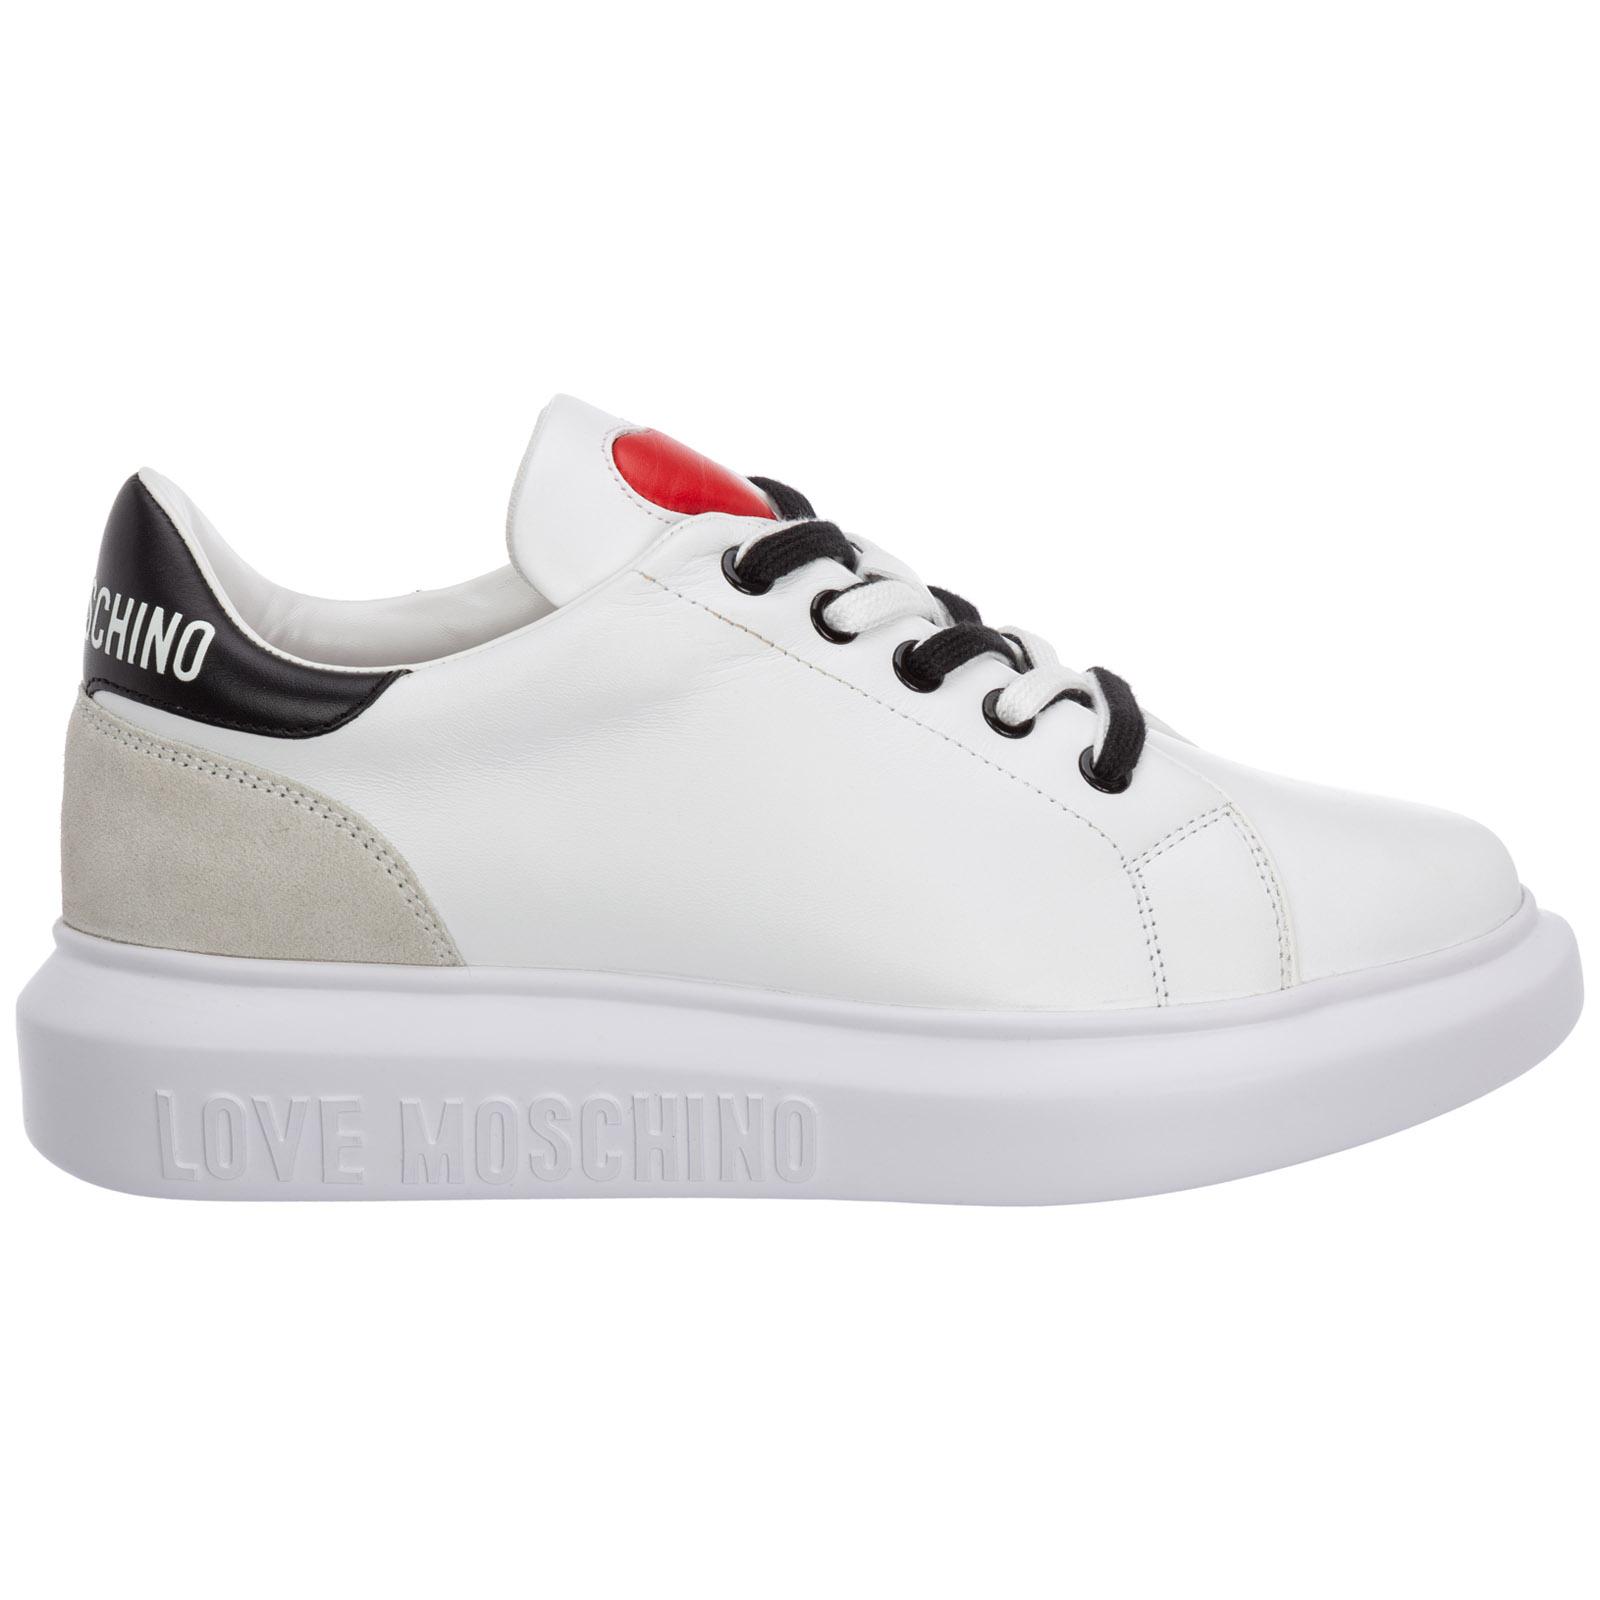 Love Moschino Shoes Leather Trainers Sneakers Love in White | Lyst